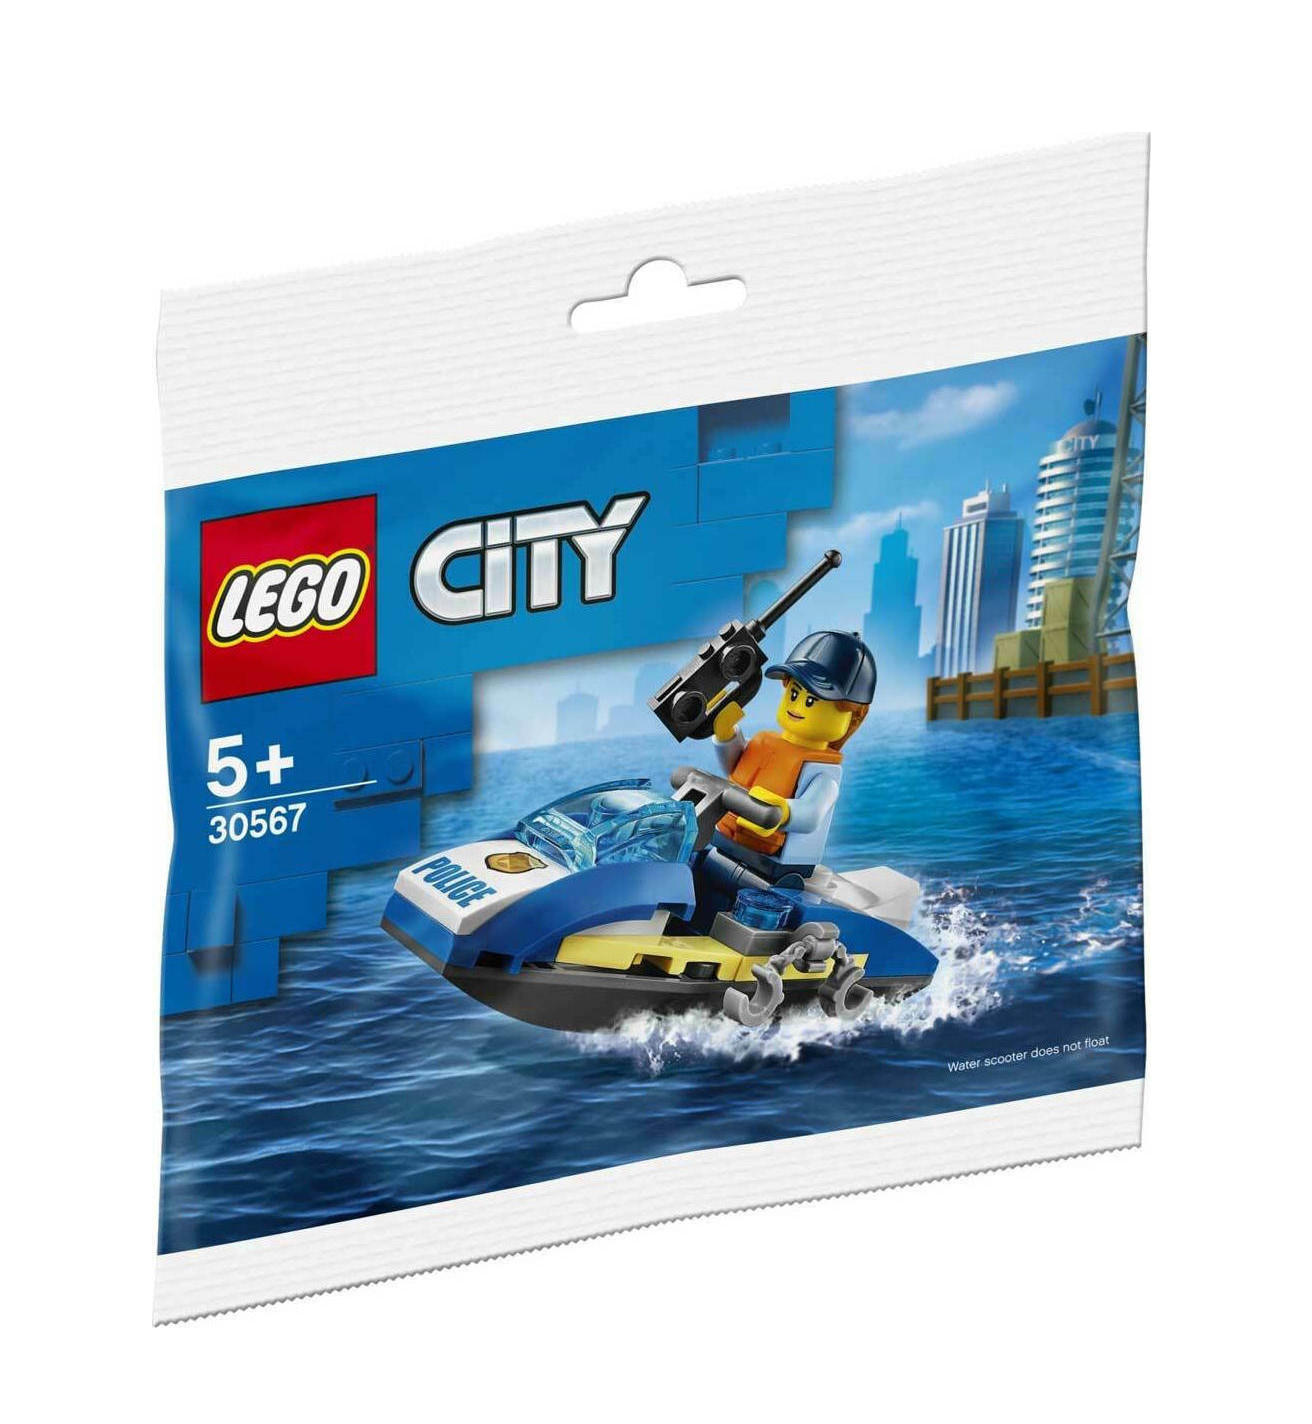 Lego City: Police Water Scooter 30567